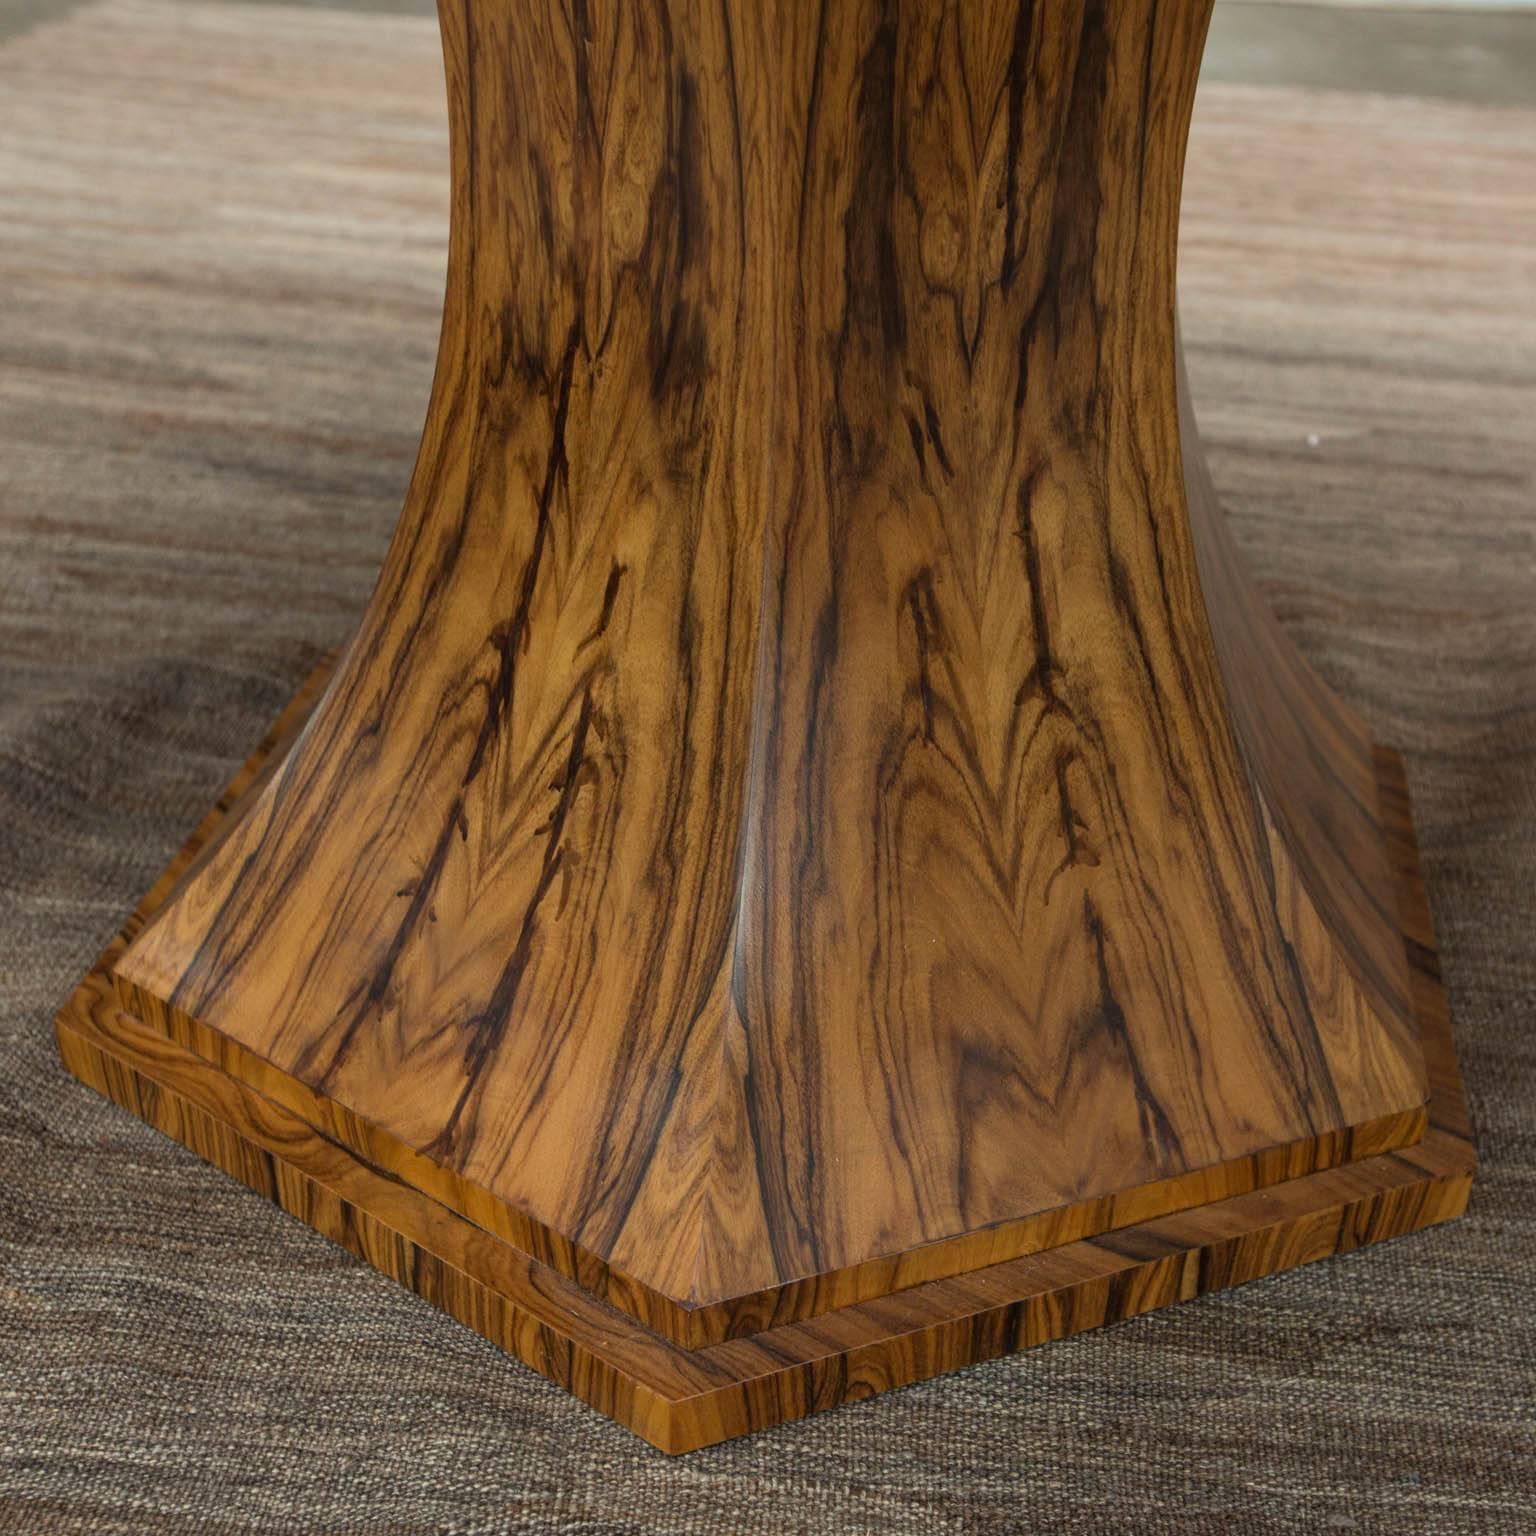 Elliptical shaped custom made table by award-winning furniture designer Gregory Clark. Formed from bookmatched Bolivian rosewood veneers atop a six sided base with matching veneers on each side.